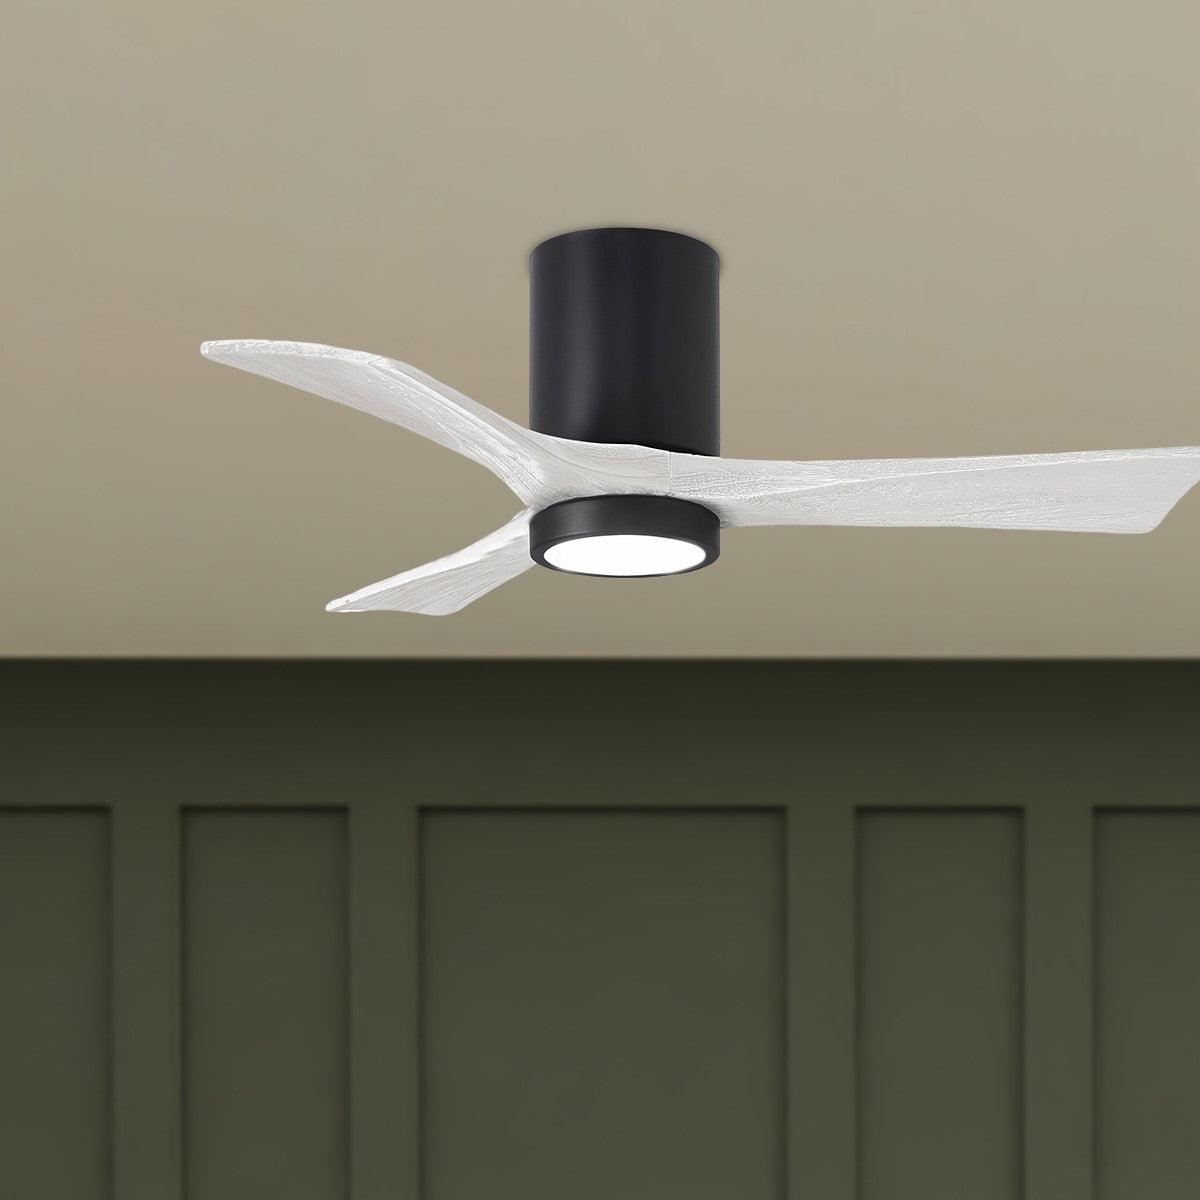 Irene 42 Inch Low Profile Outdoor Ceiling Fan With Light, Wall And Remote Control Included